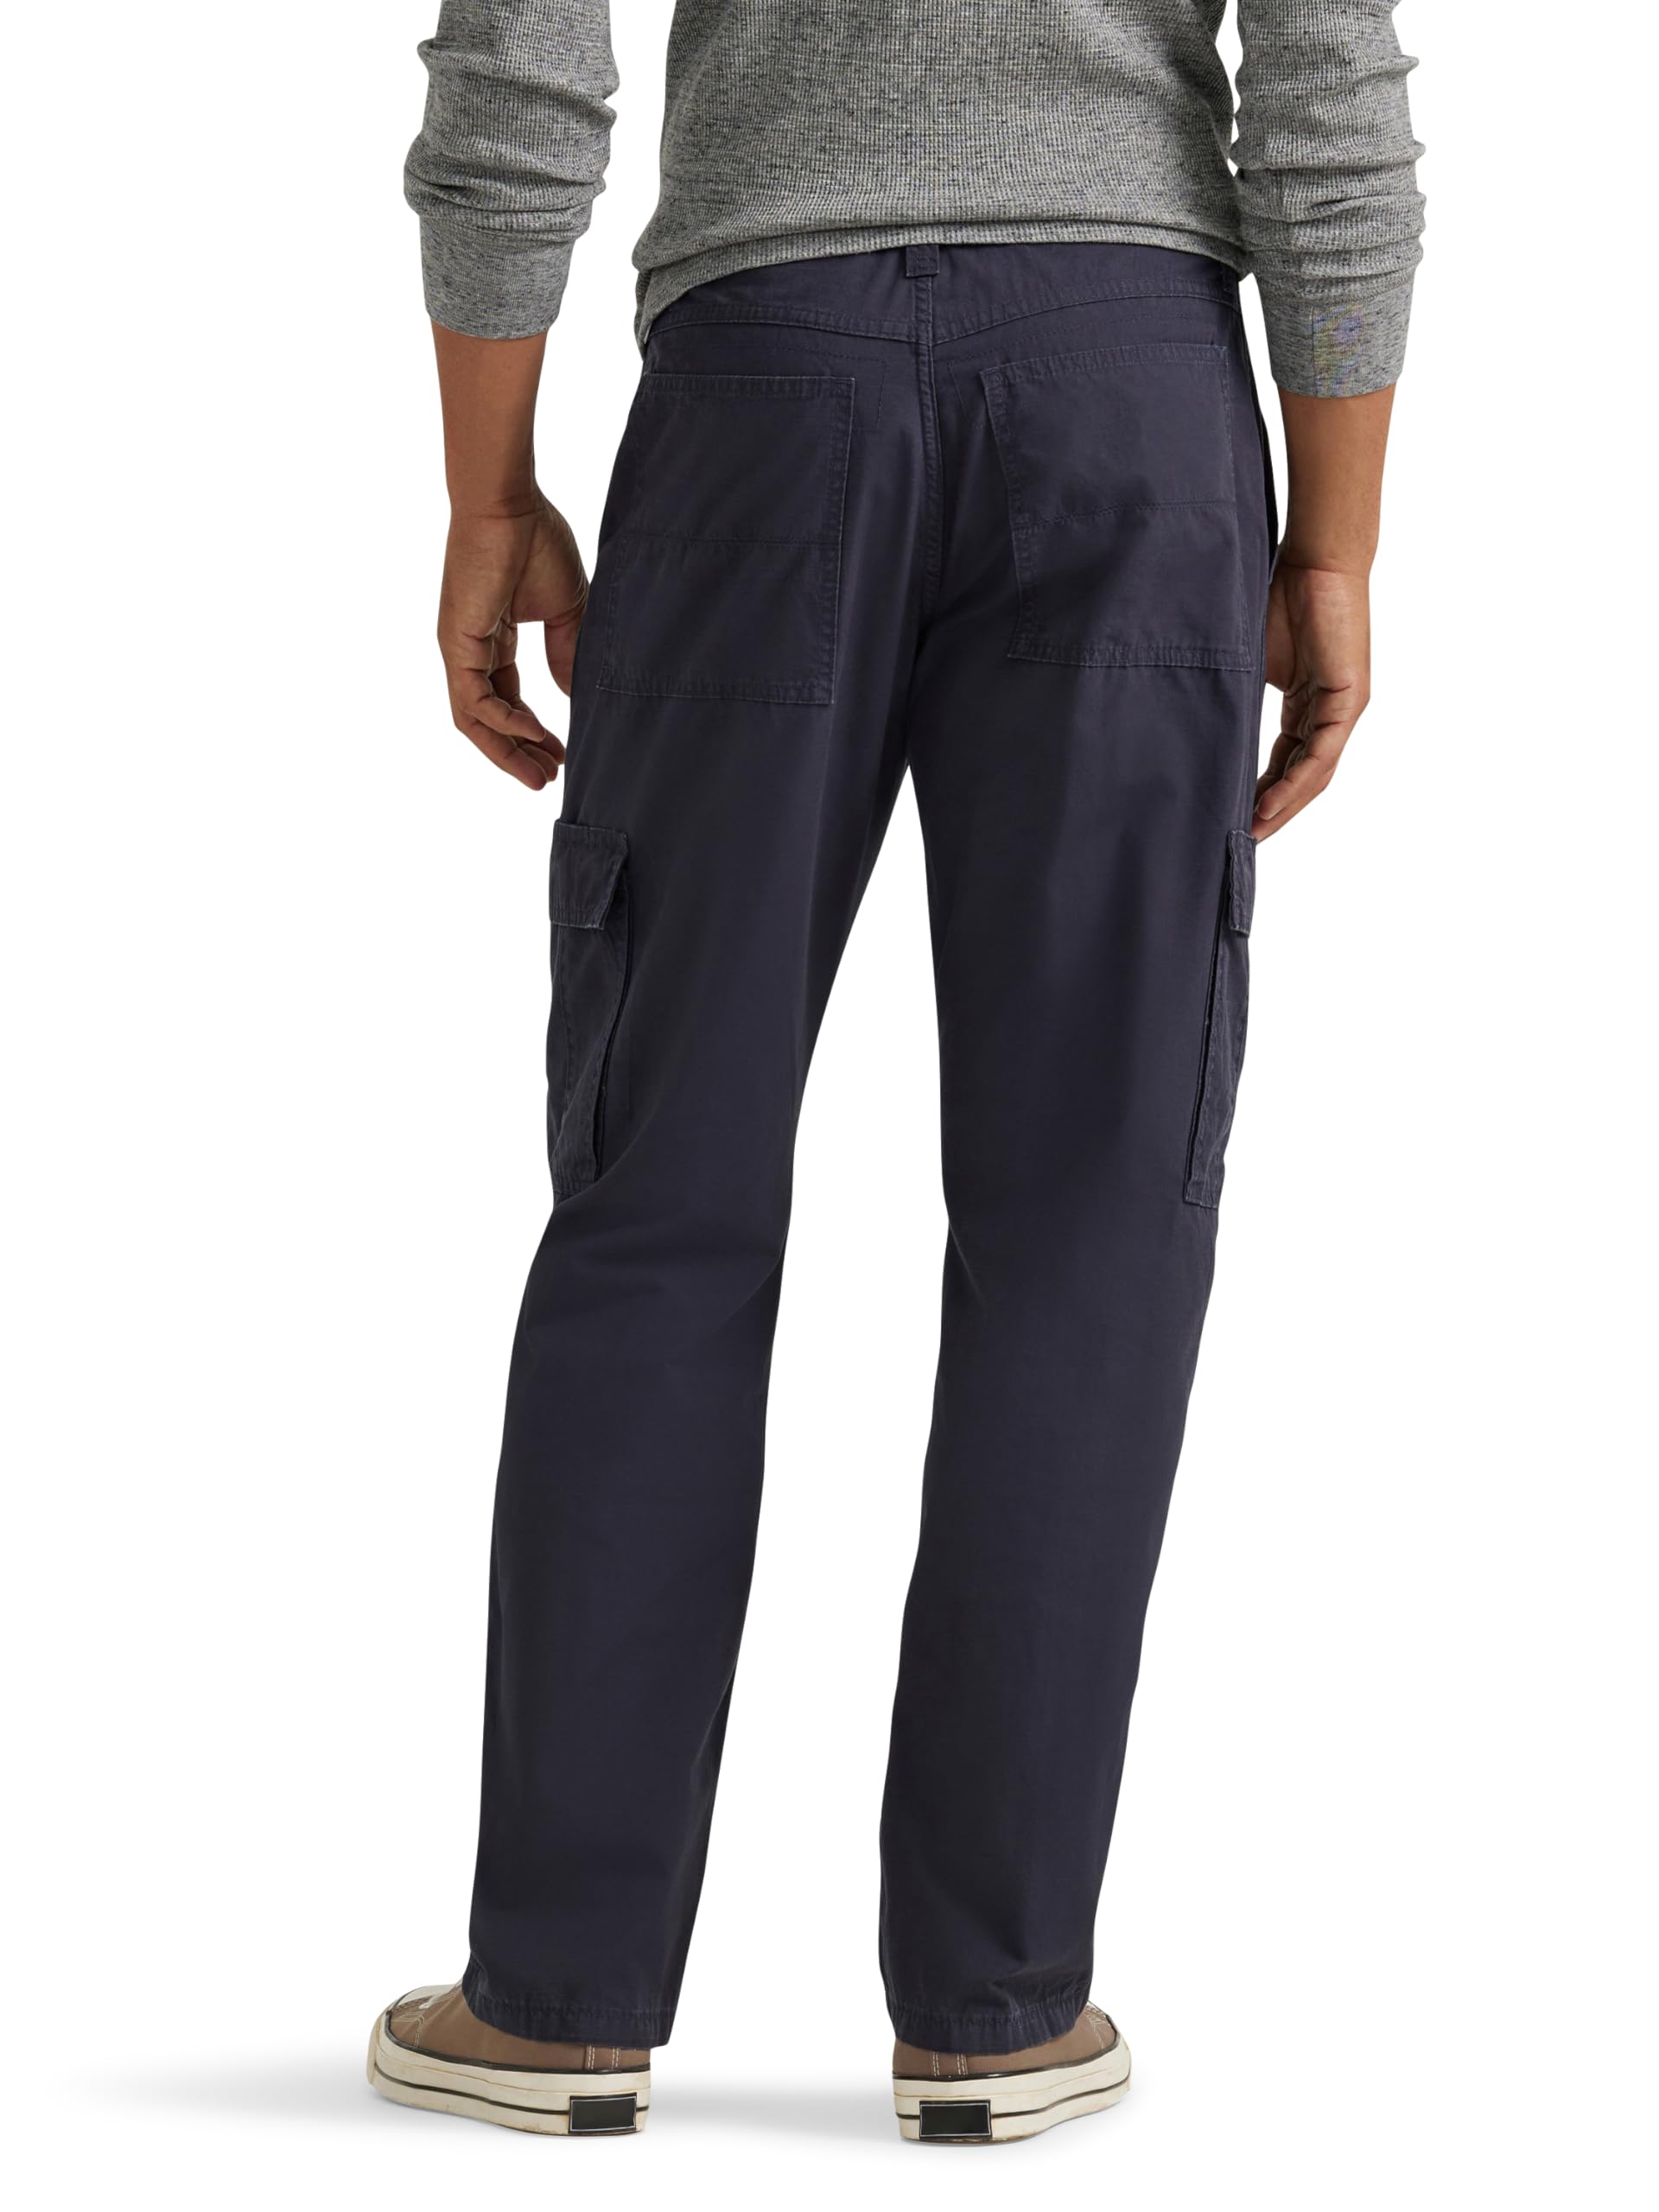 Wrangler Authentics Men’s Twill Relaxed Fit Cargo Pant